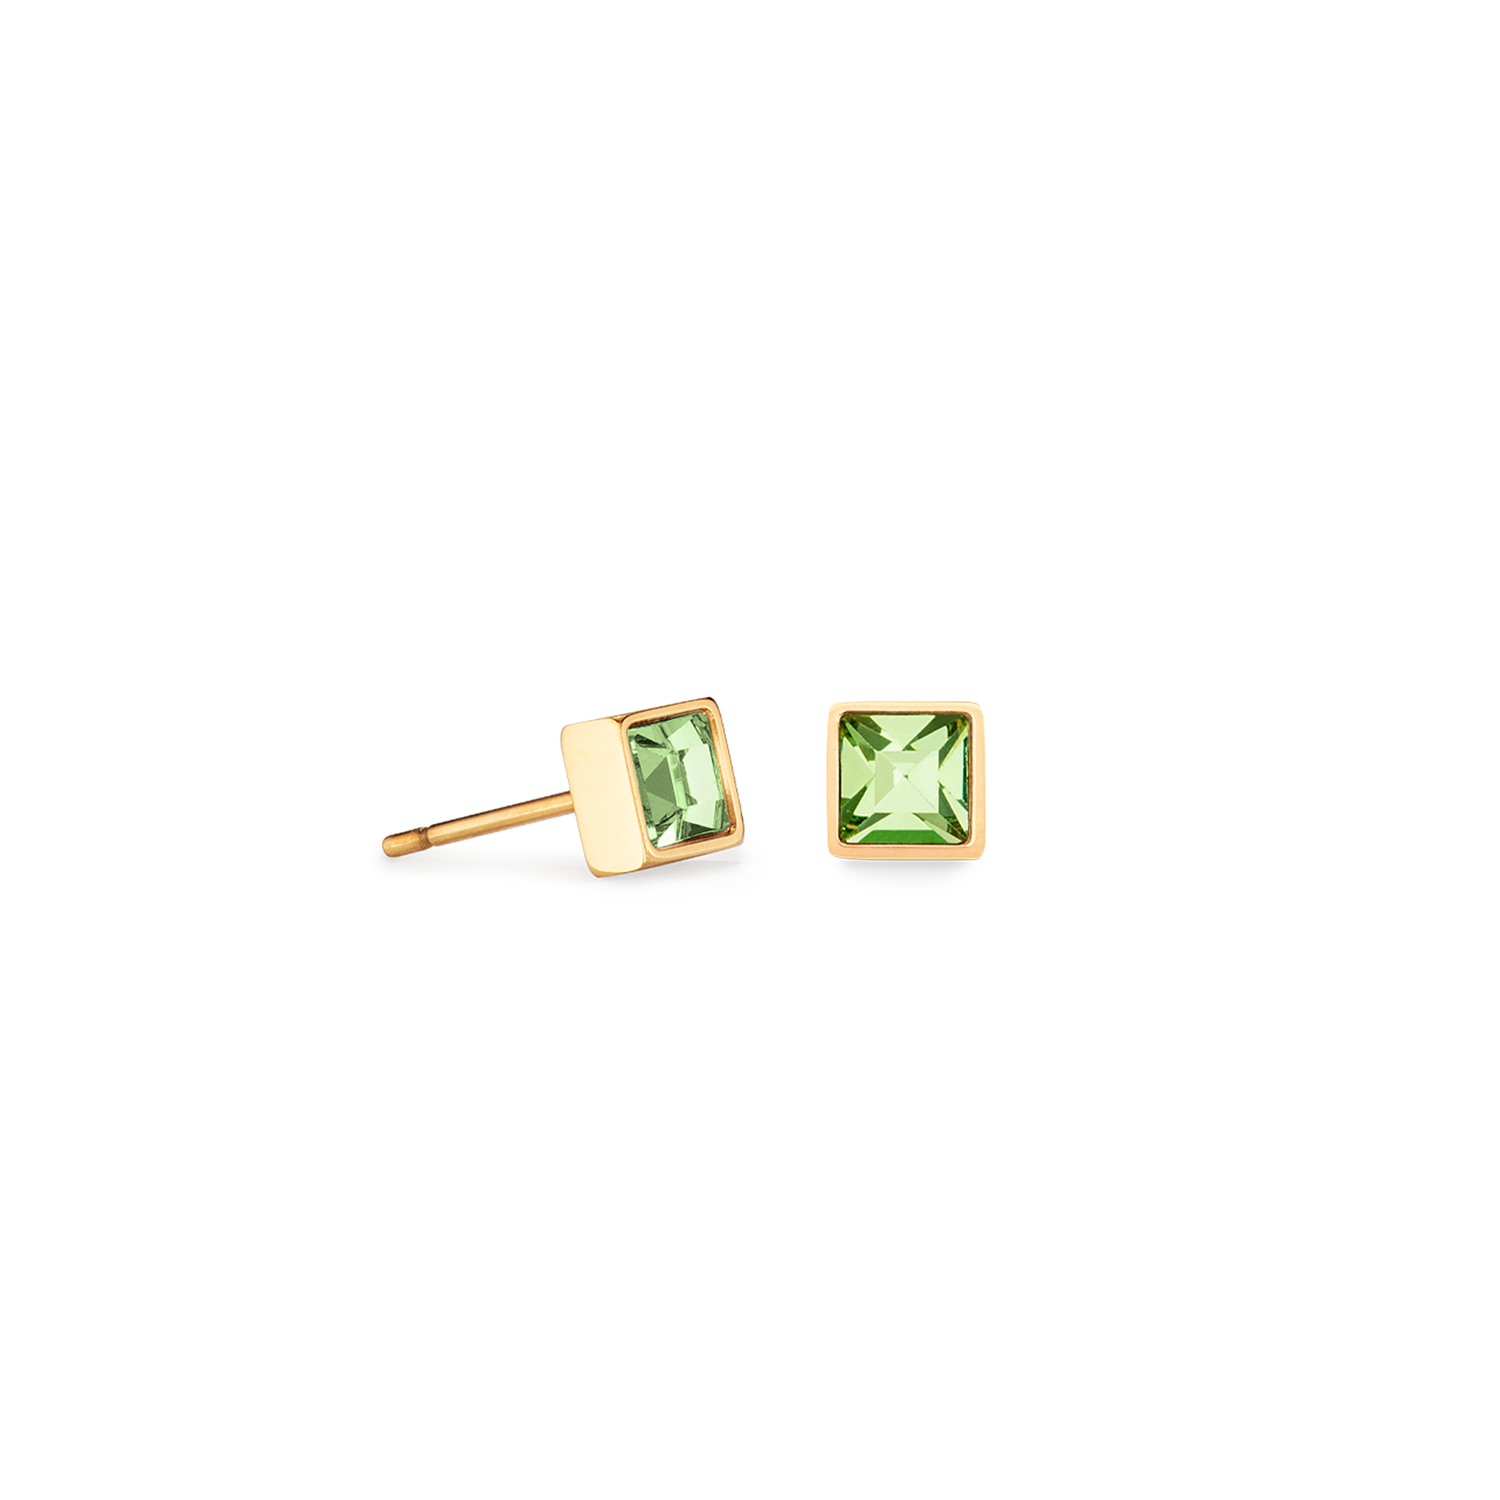 Brilliant Square Small Stud Earrings with Crystals 0501/21_0516 - Lime Green